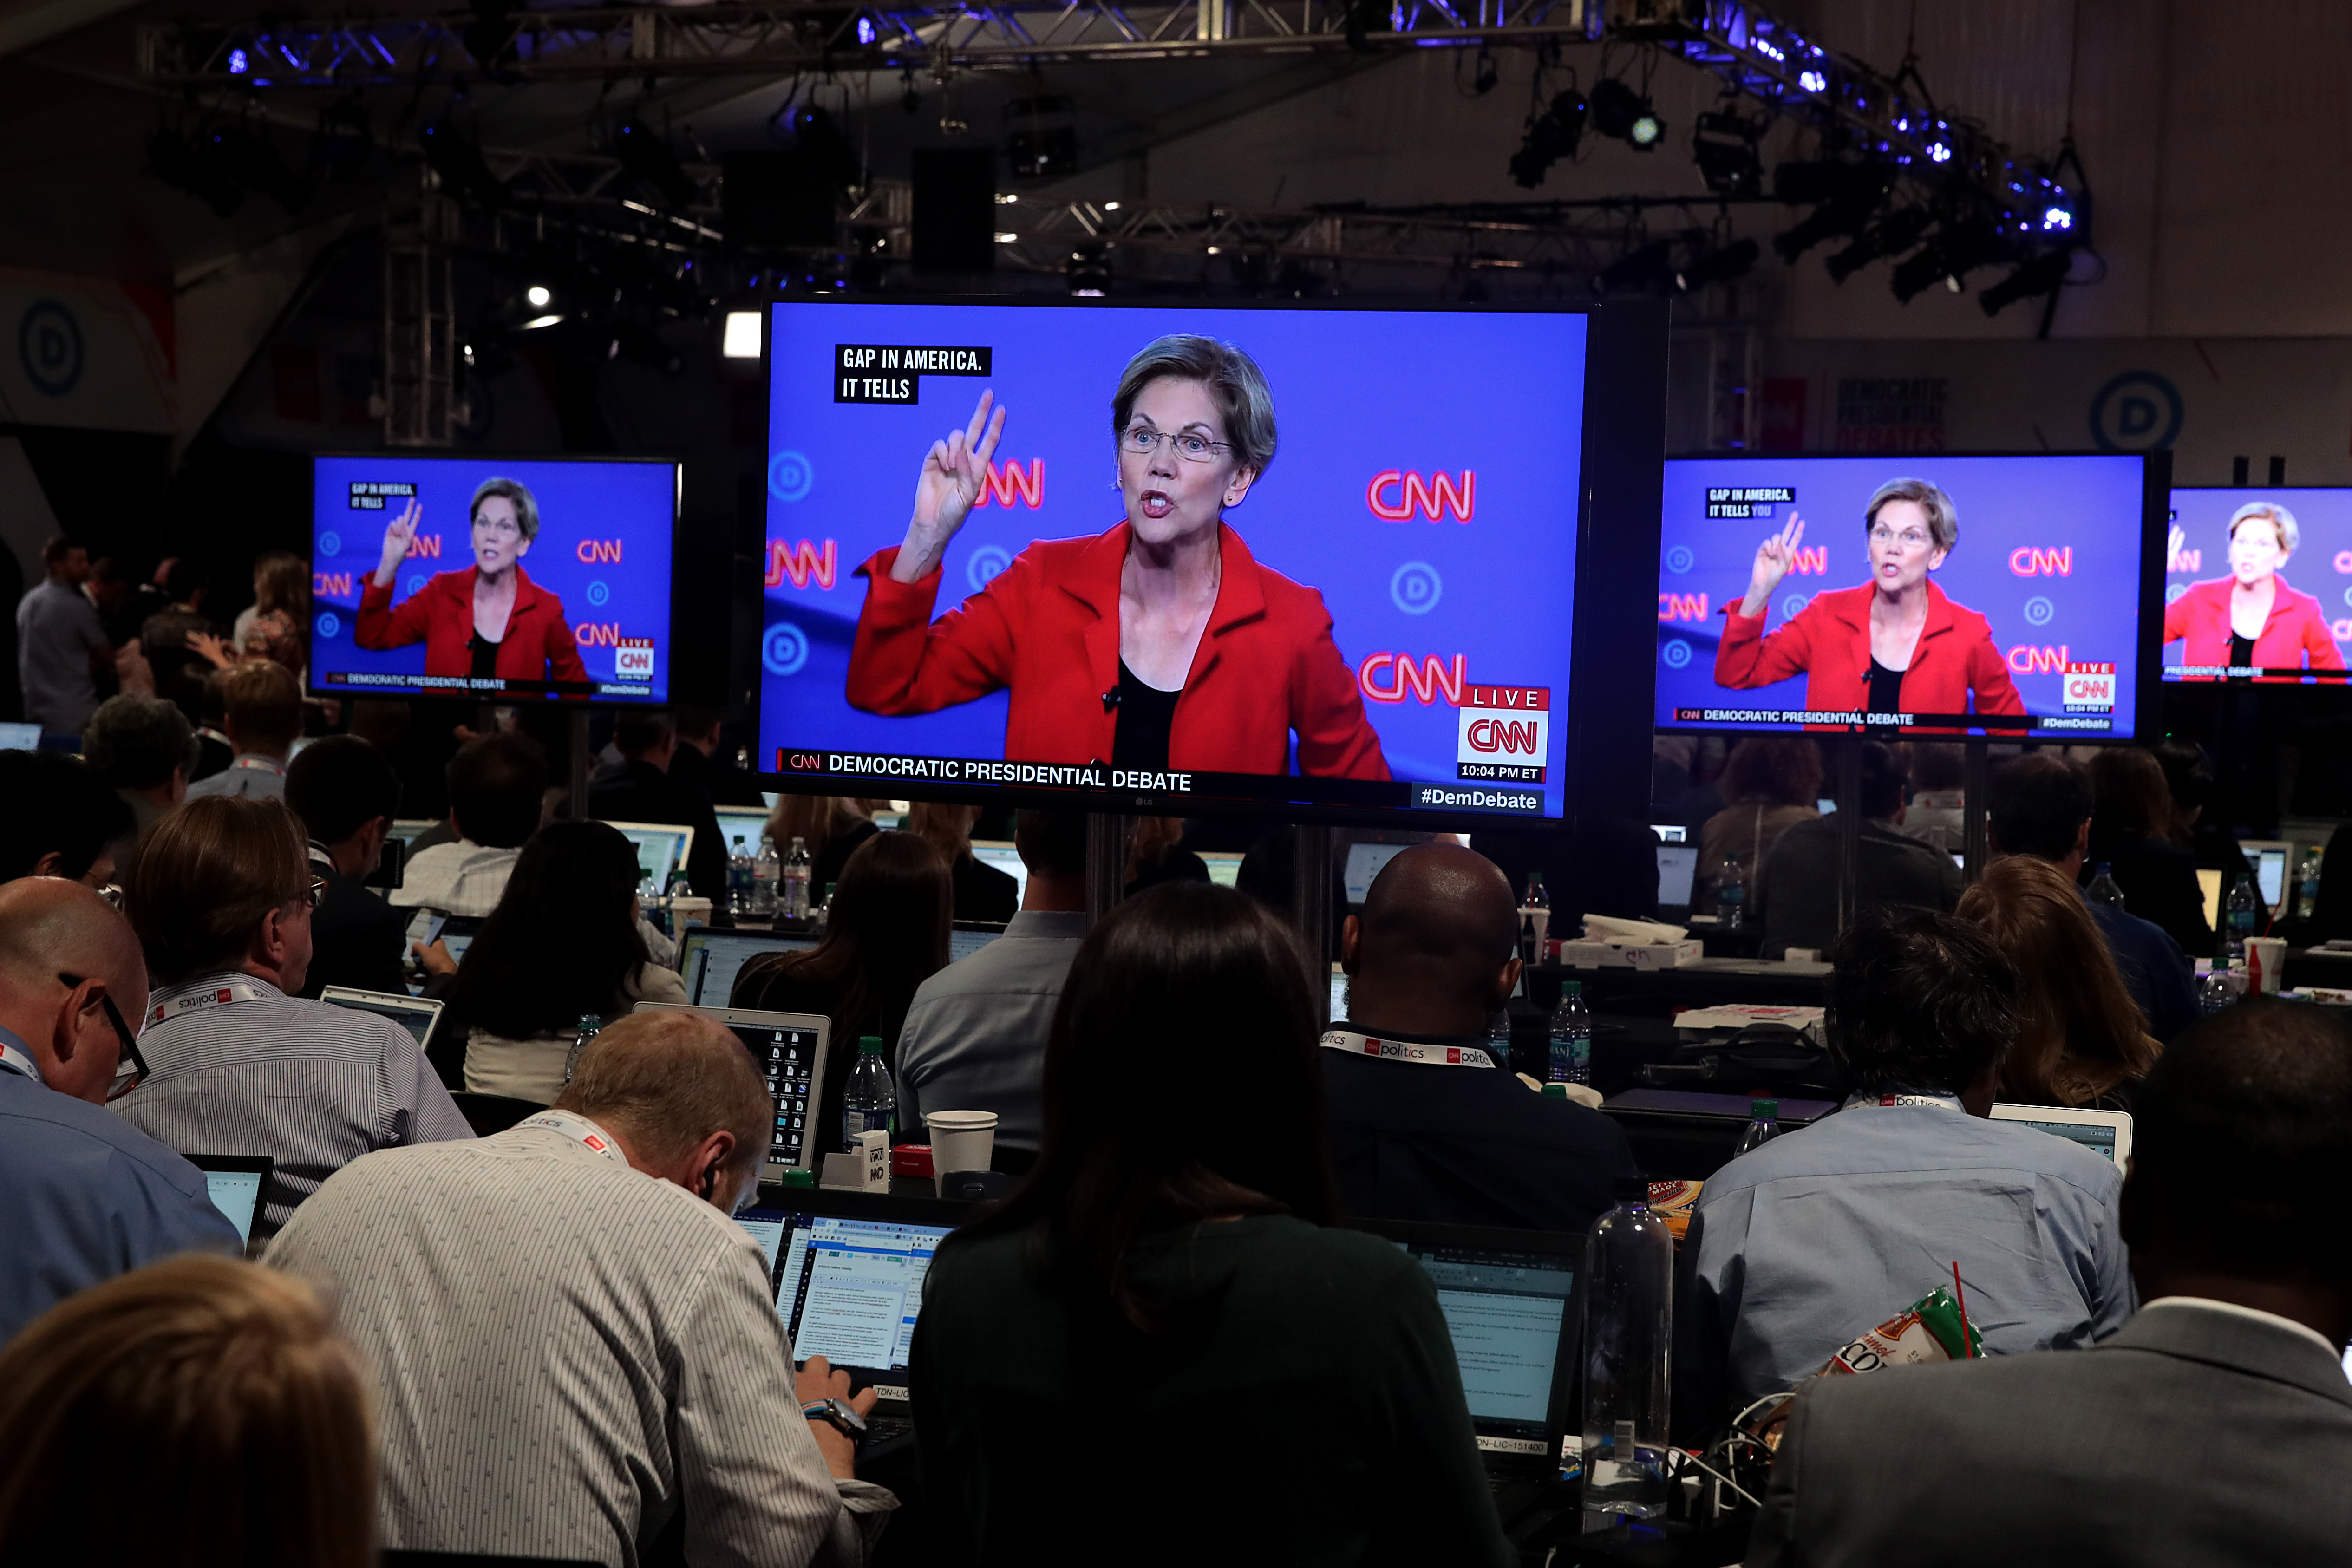 DETROIT, MICHIGAN - JULY 30: Democratic presidential candidate Sen. Elizabeth Warren (D-MA) is shown on television monitors in the press room of the Democratic Presidential Debate at the Fox Theatre July 30, 2019 in Detroit, Michigan. 20 Democratic presidential candidates were split into two groups of 10 to take part in the debate sponsored by CNN held over two nights at Detroit’s Fox Theatre. (Photo by Scott Olson/Getty Images)